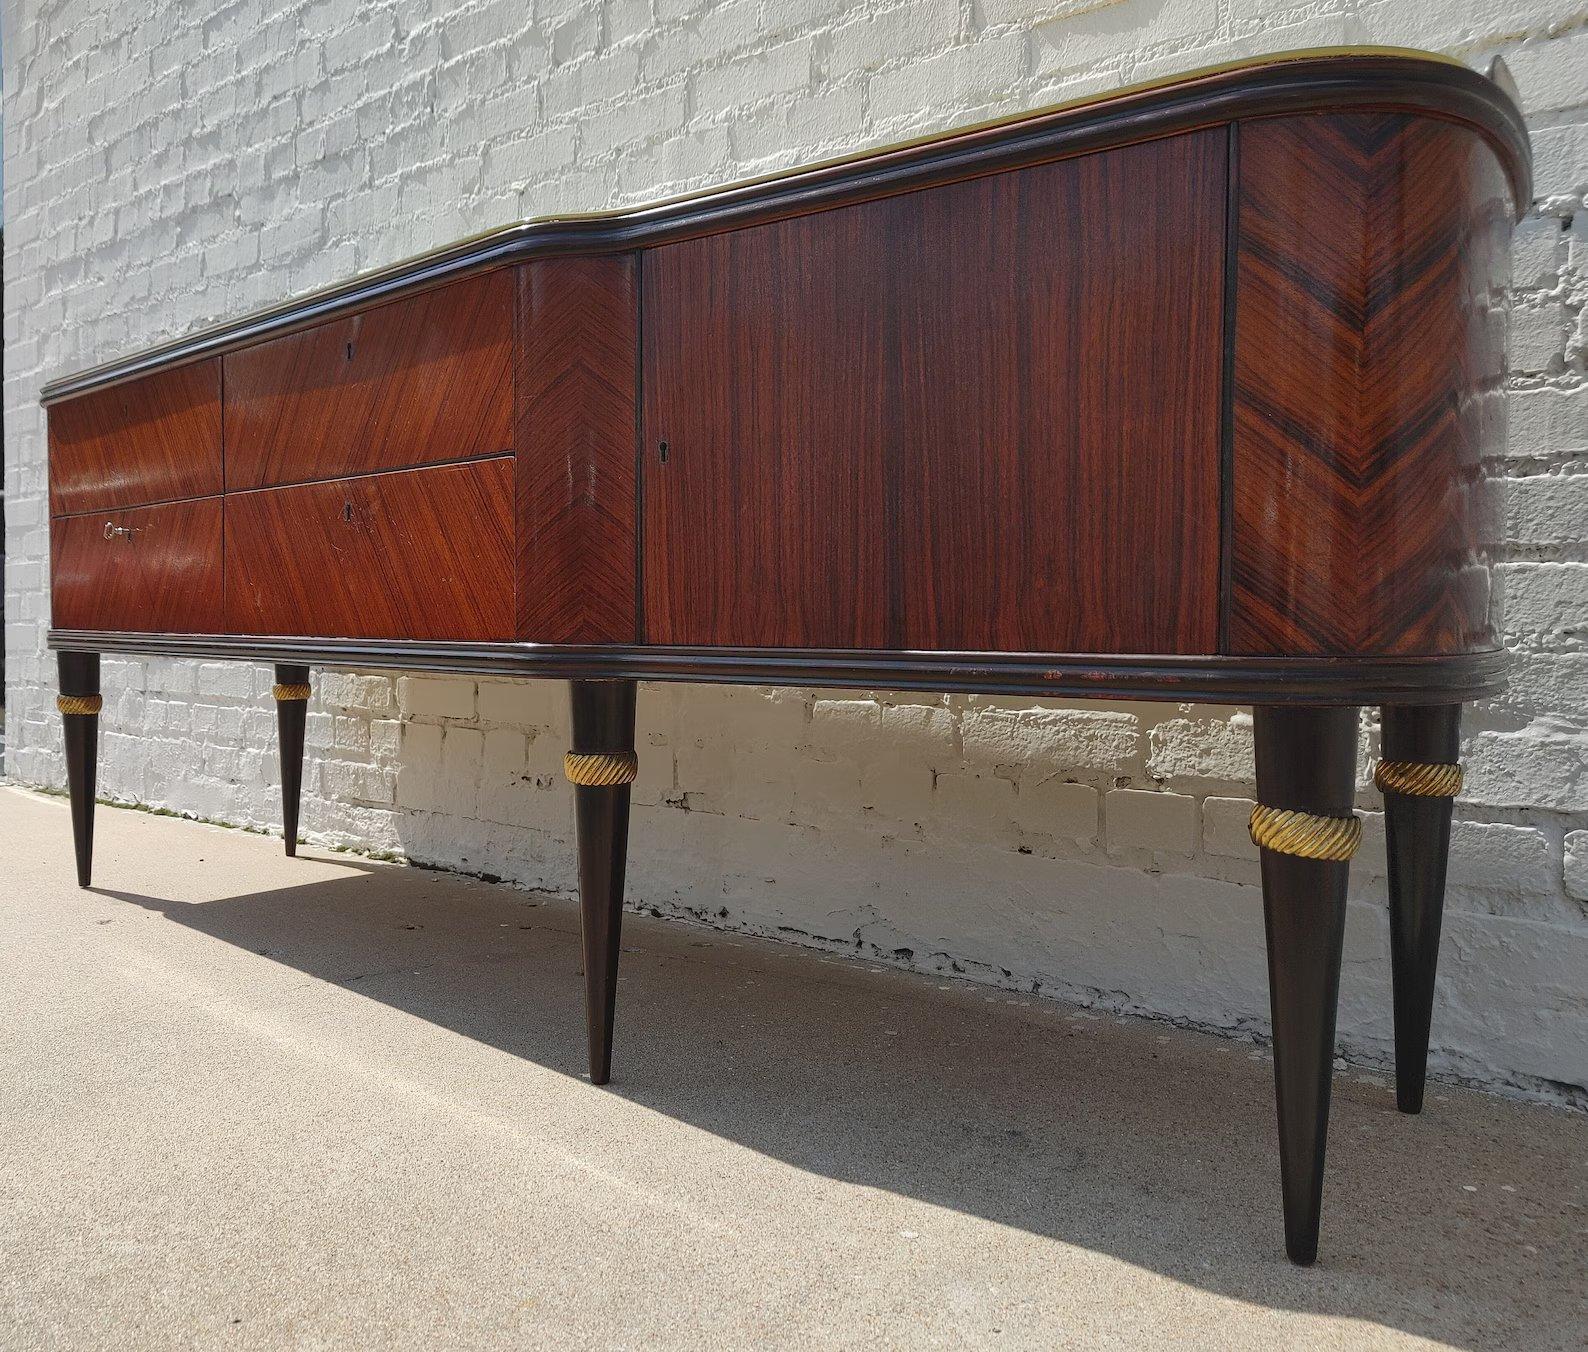 Italian Rosewood Herringbone Credenza

Above average vintage condition and structurally sound. Has some expected finish wear and scratching. Right door has some lacquer wear which is somewhat visible in the listing pictures. Please request